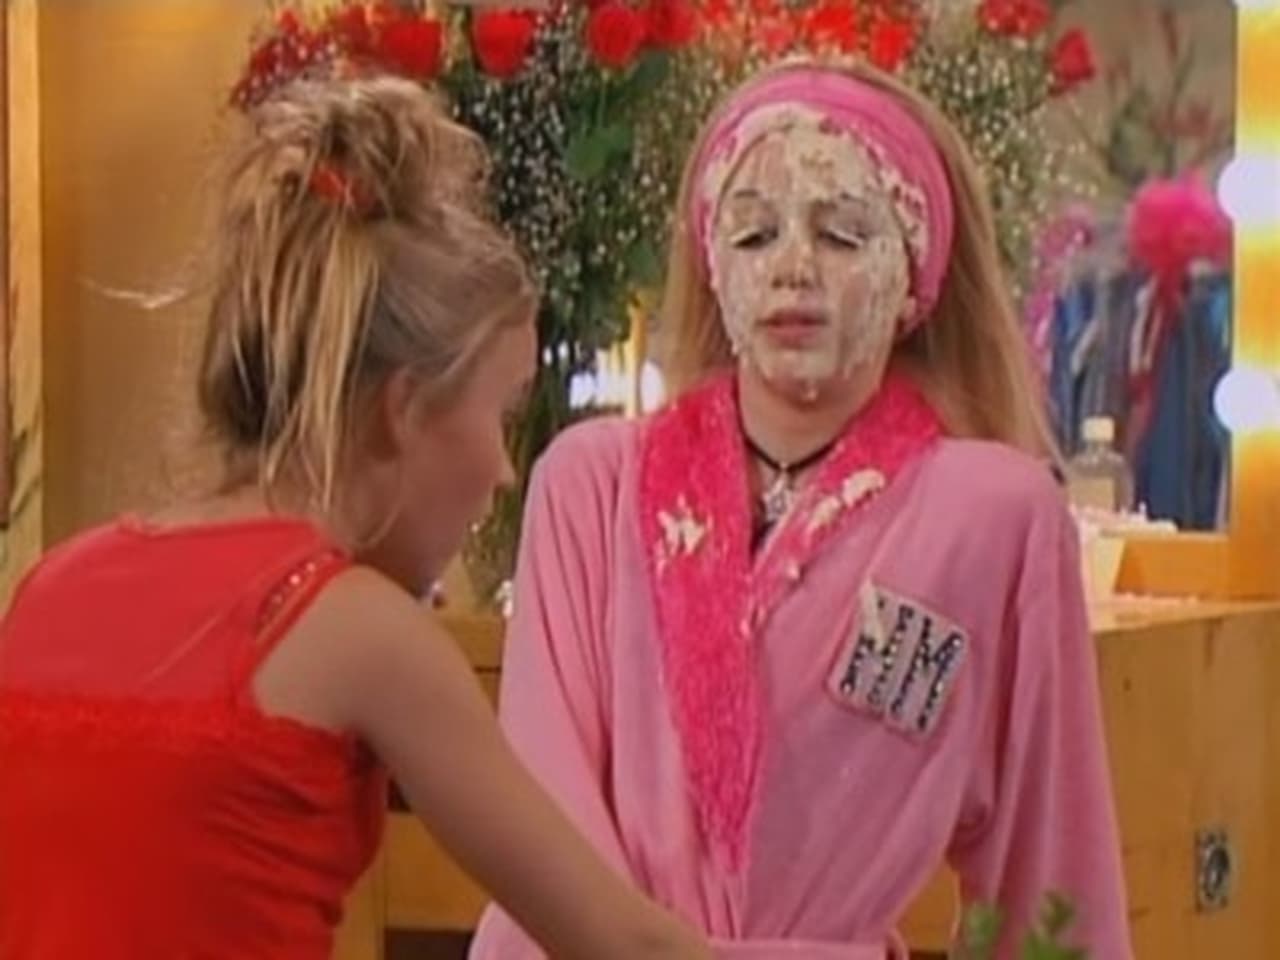 Hannah Montana - Season 1 Episode 1 : Lilly, Do You Want to Know a Secret?